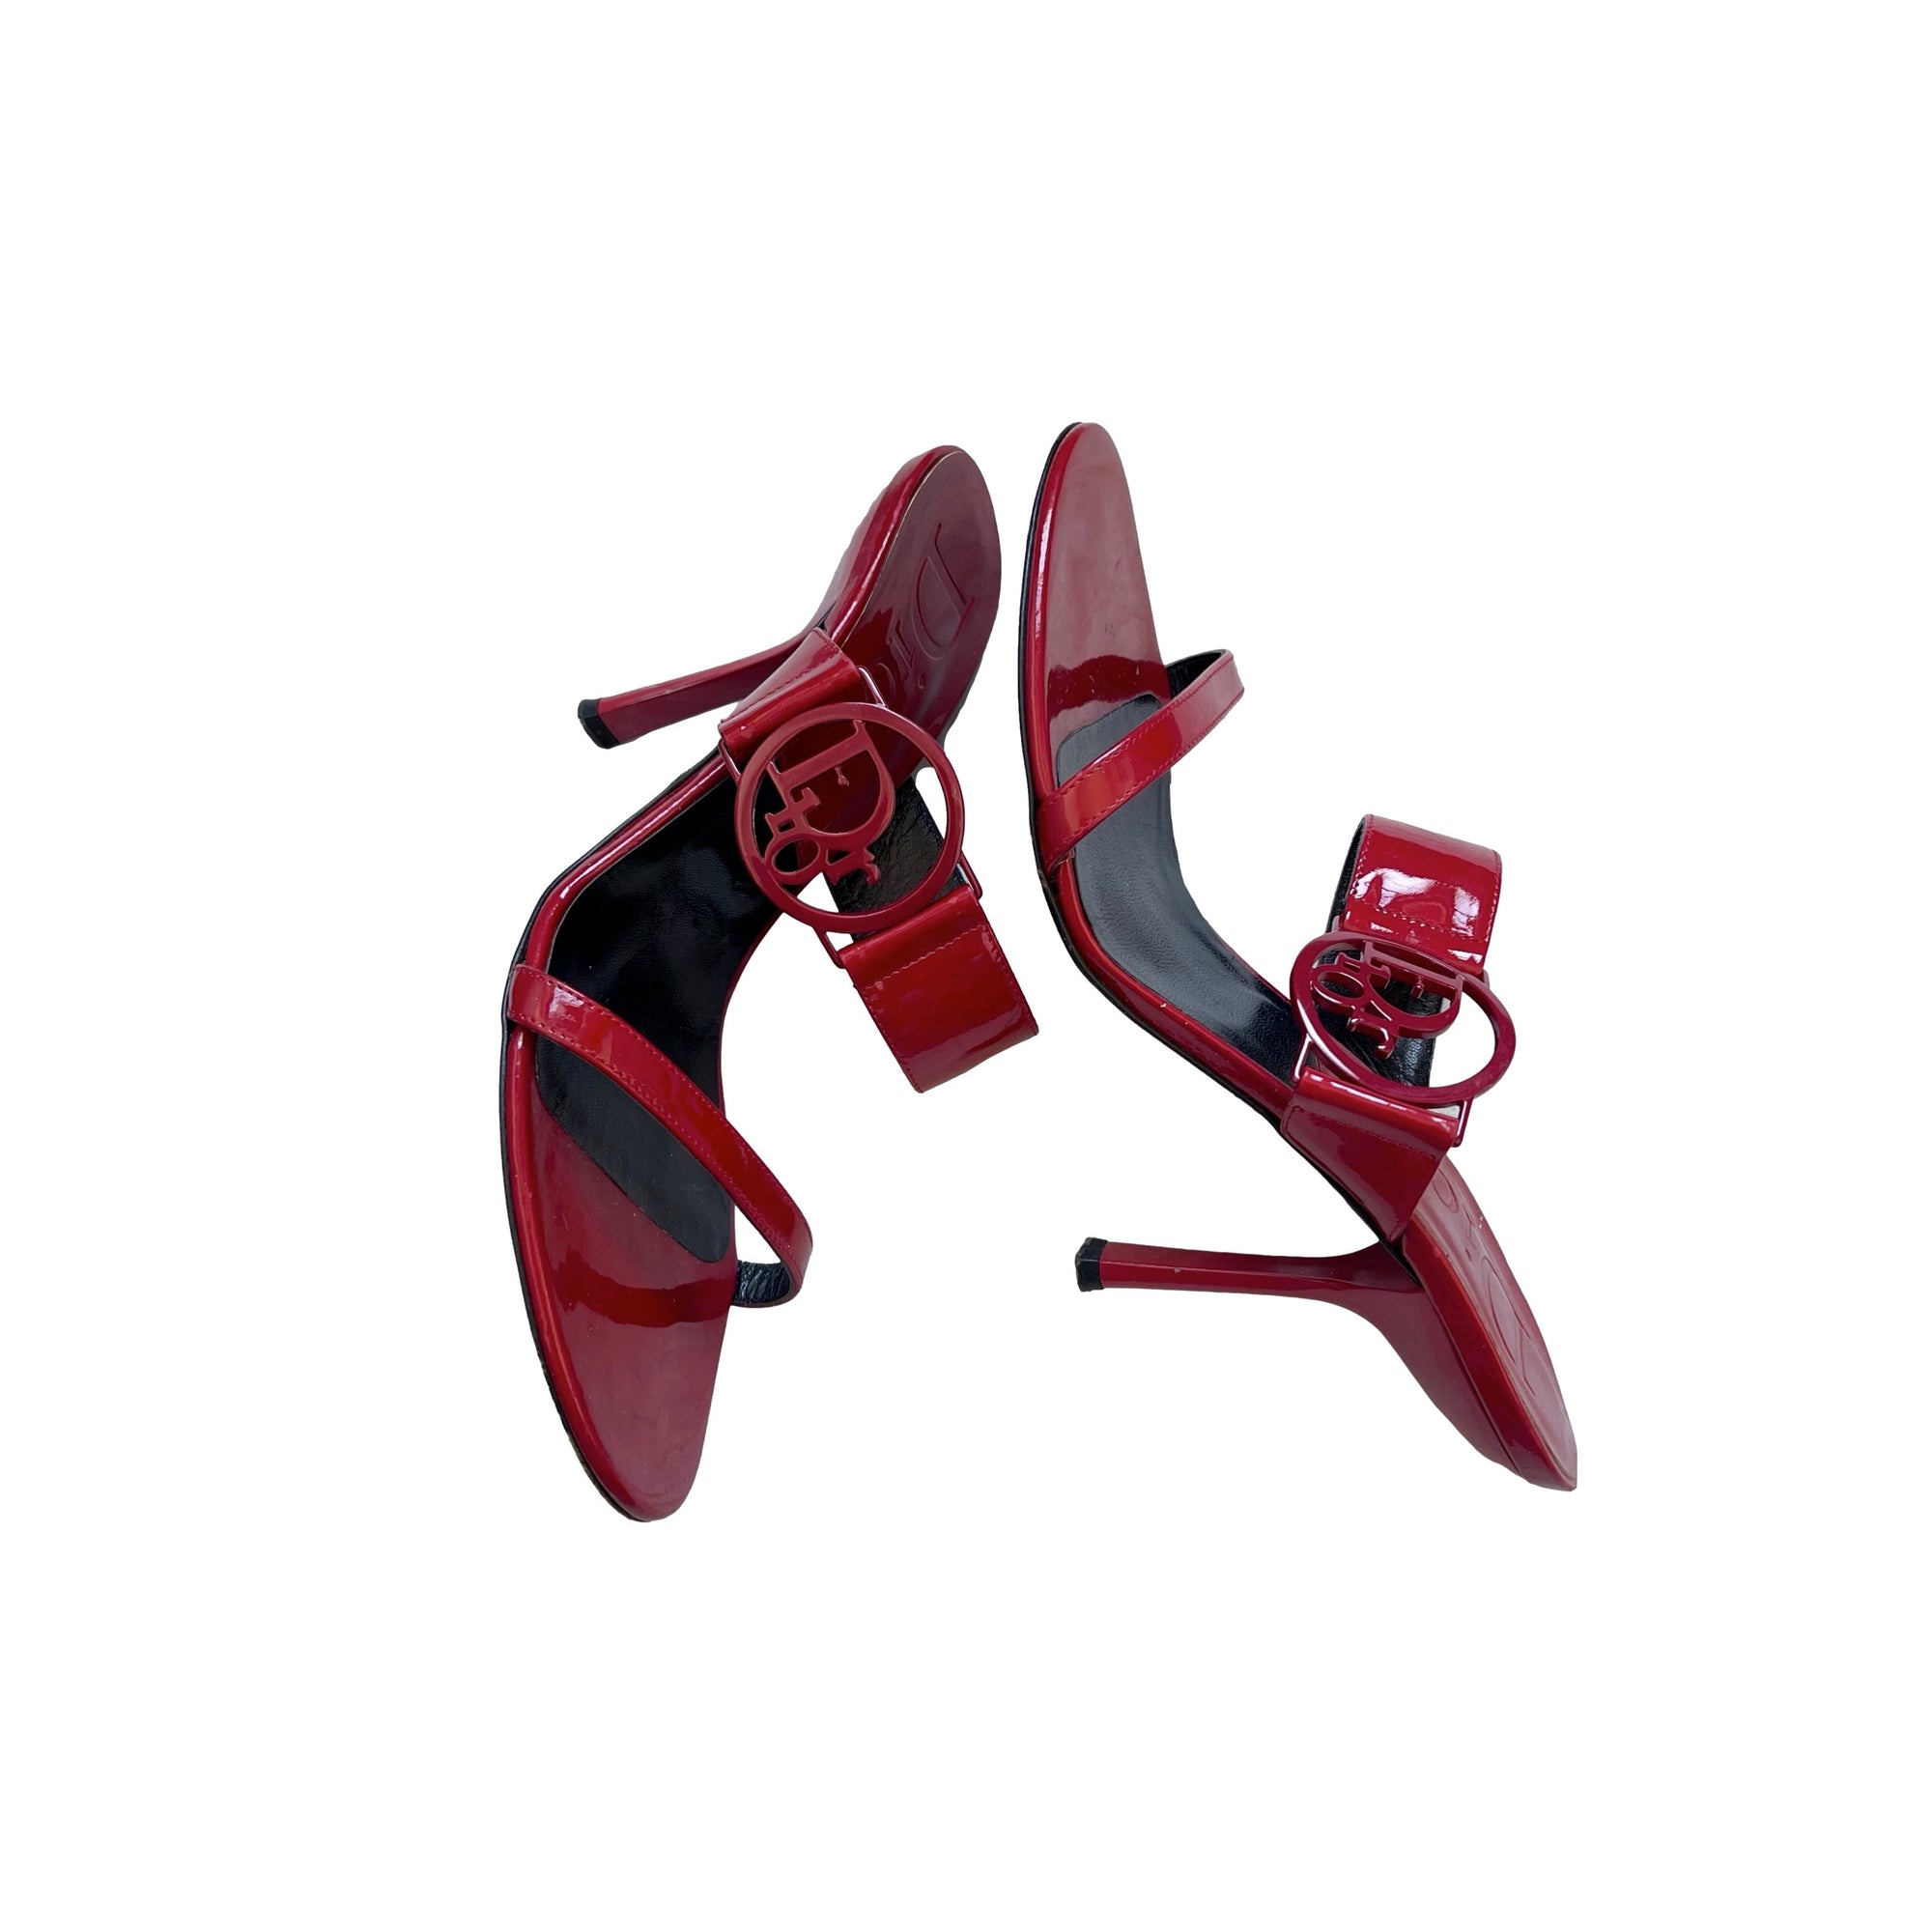 Dior Red Patent Strap Heels - Shoes